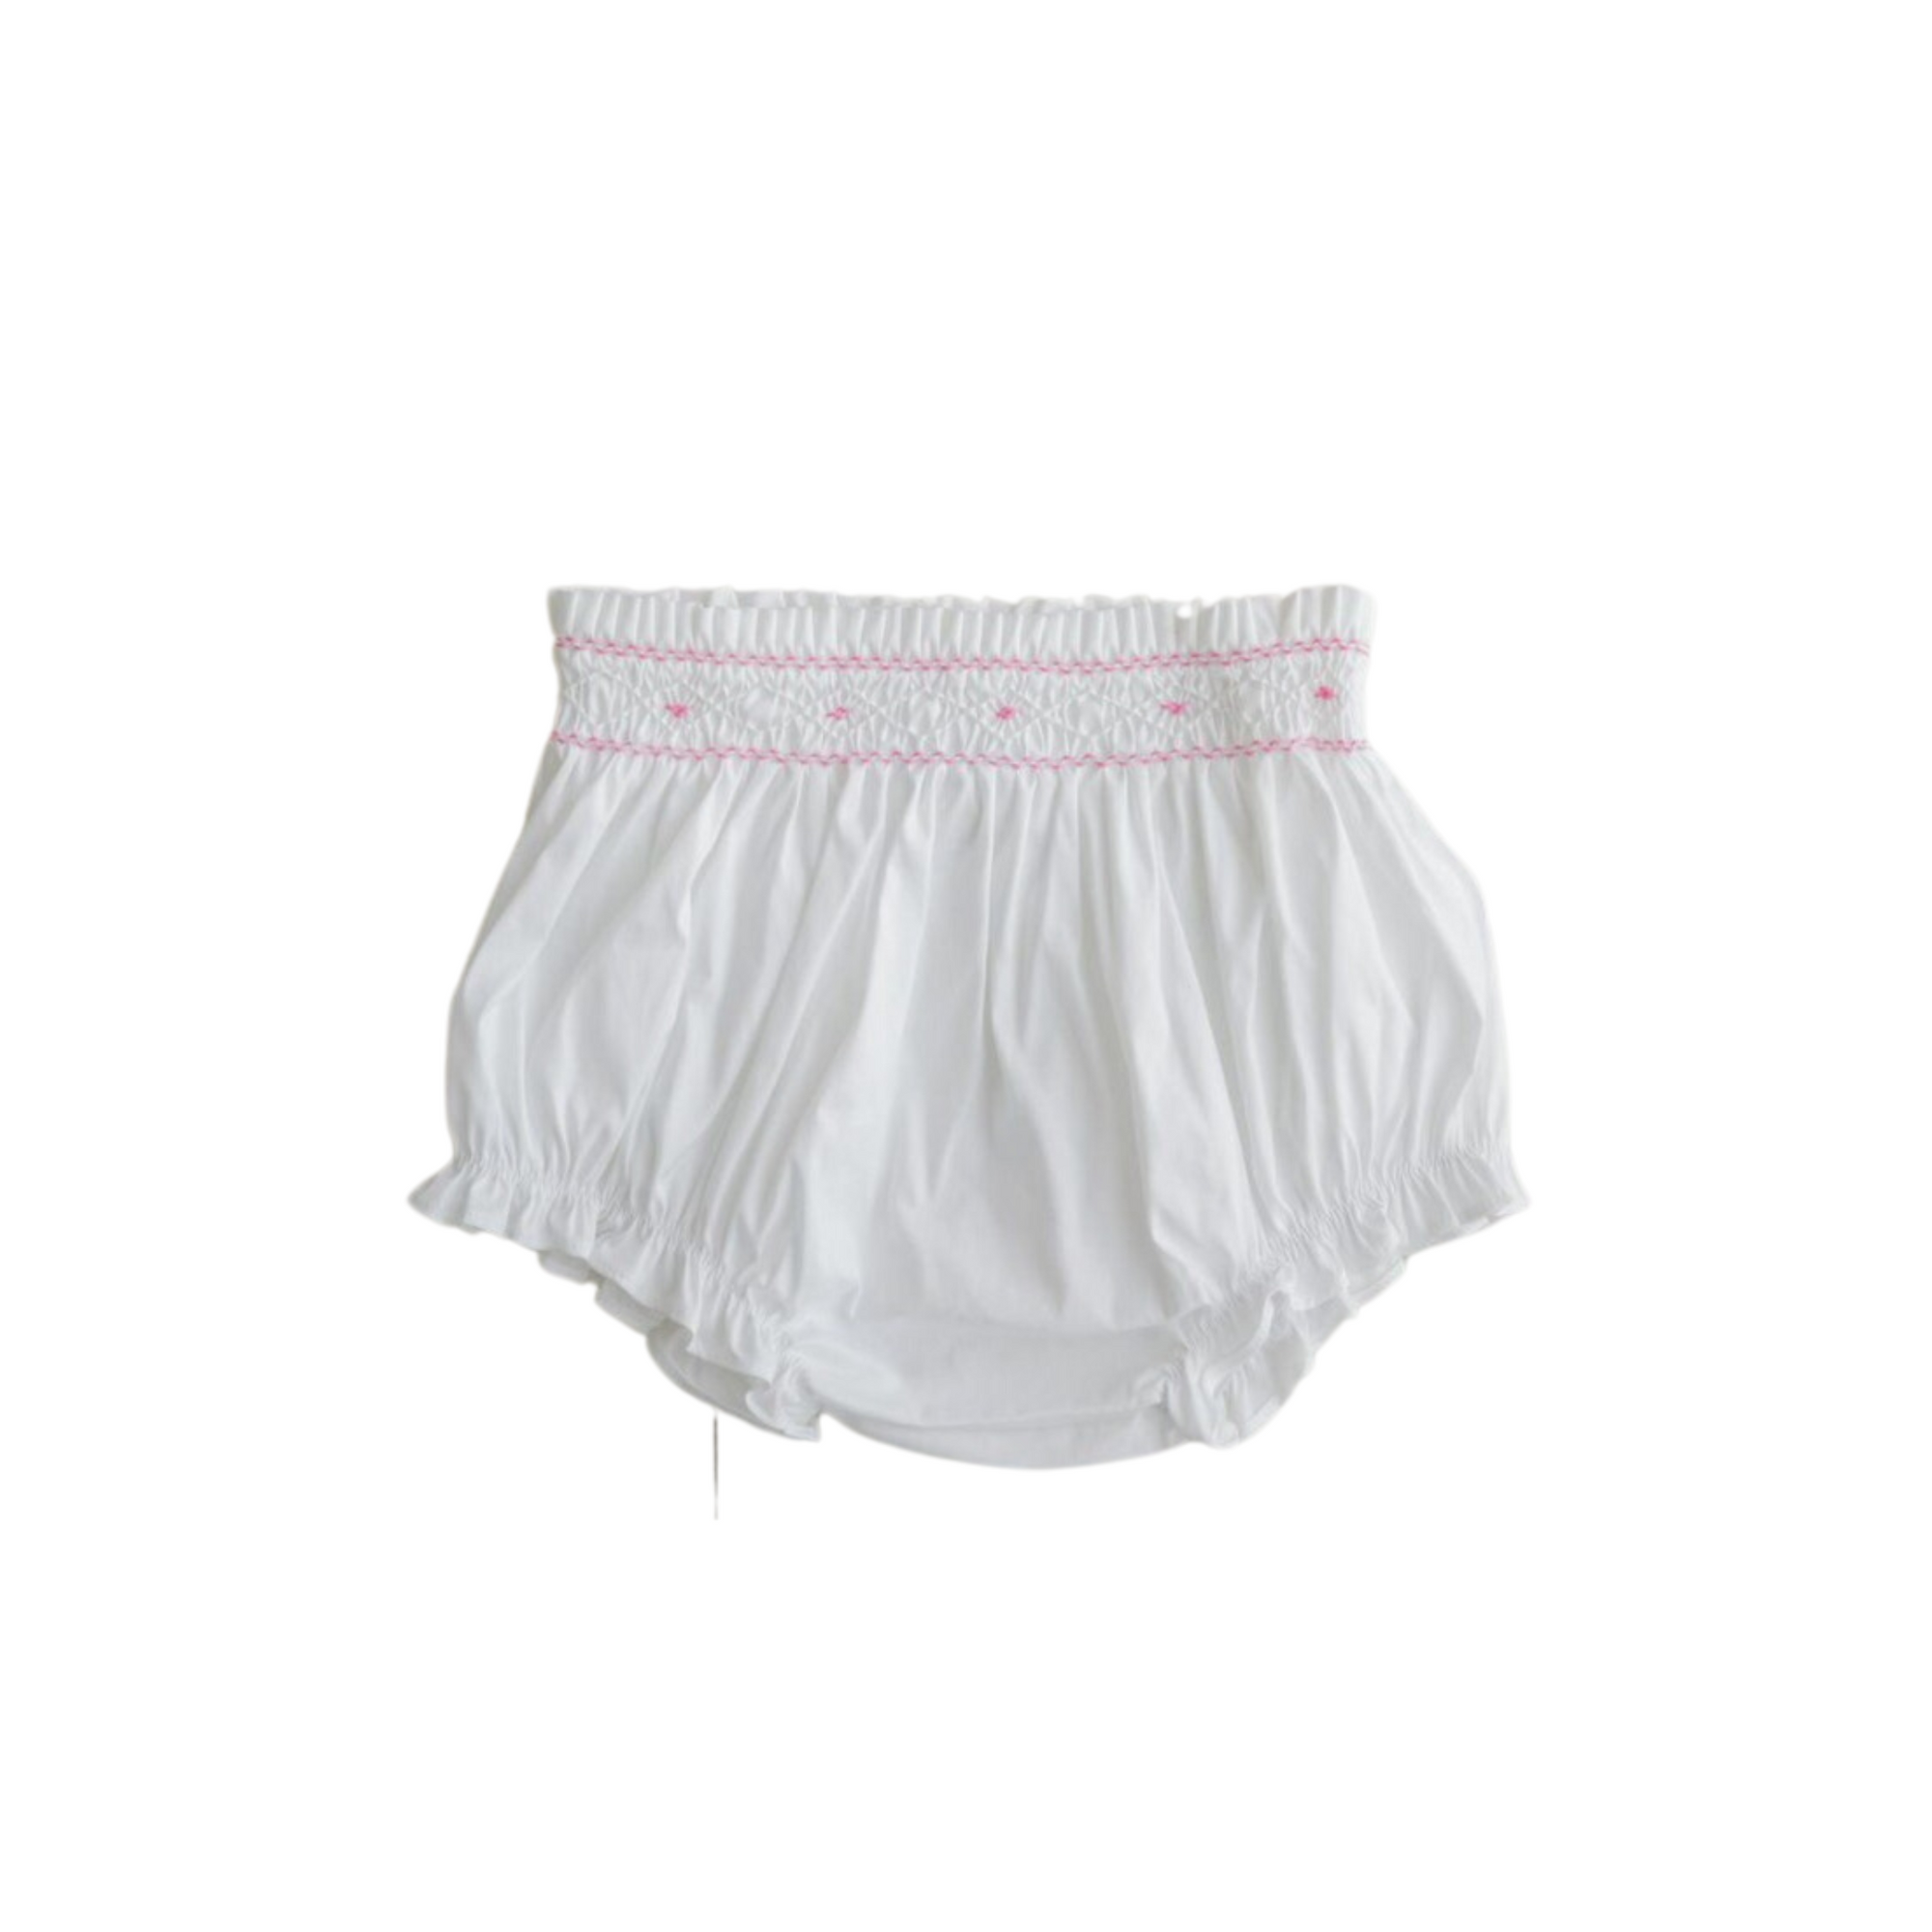 Smox Rox Bloomers - White and Pastel Pink